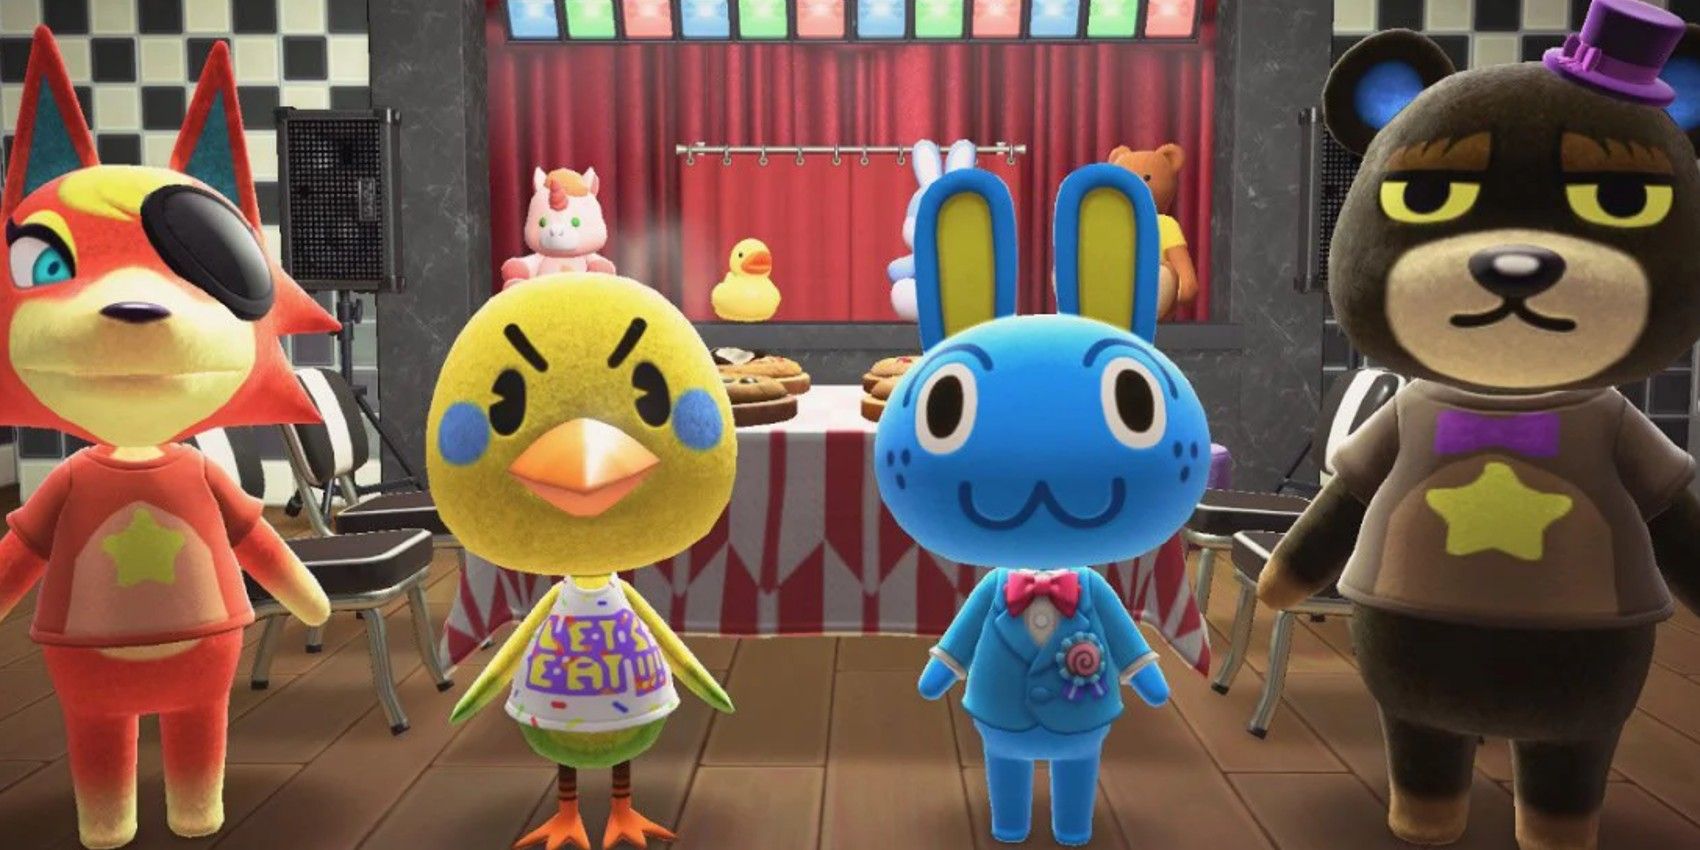 Animal Crossing Player Builds Five Nights At Freddy’s-Themed Restaurant